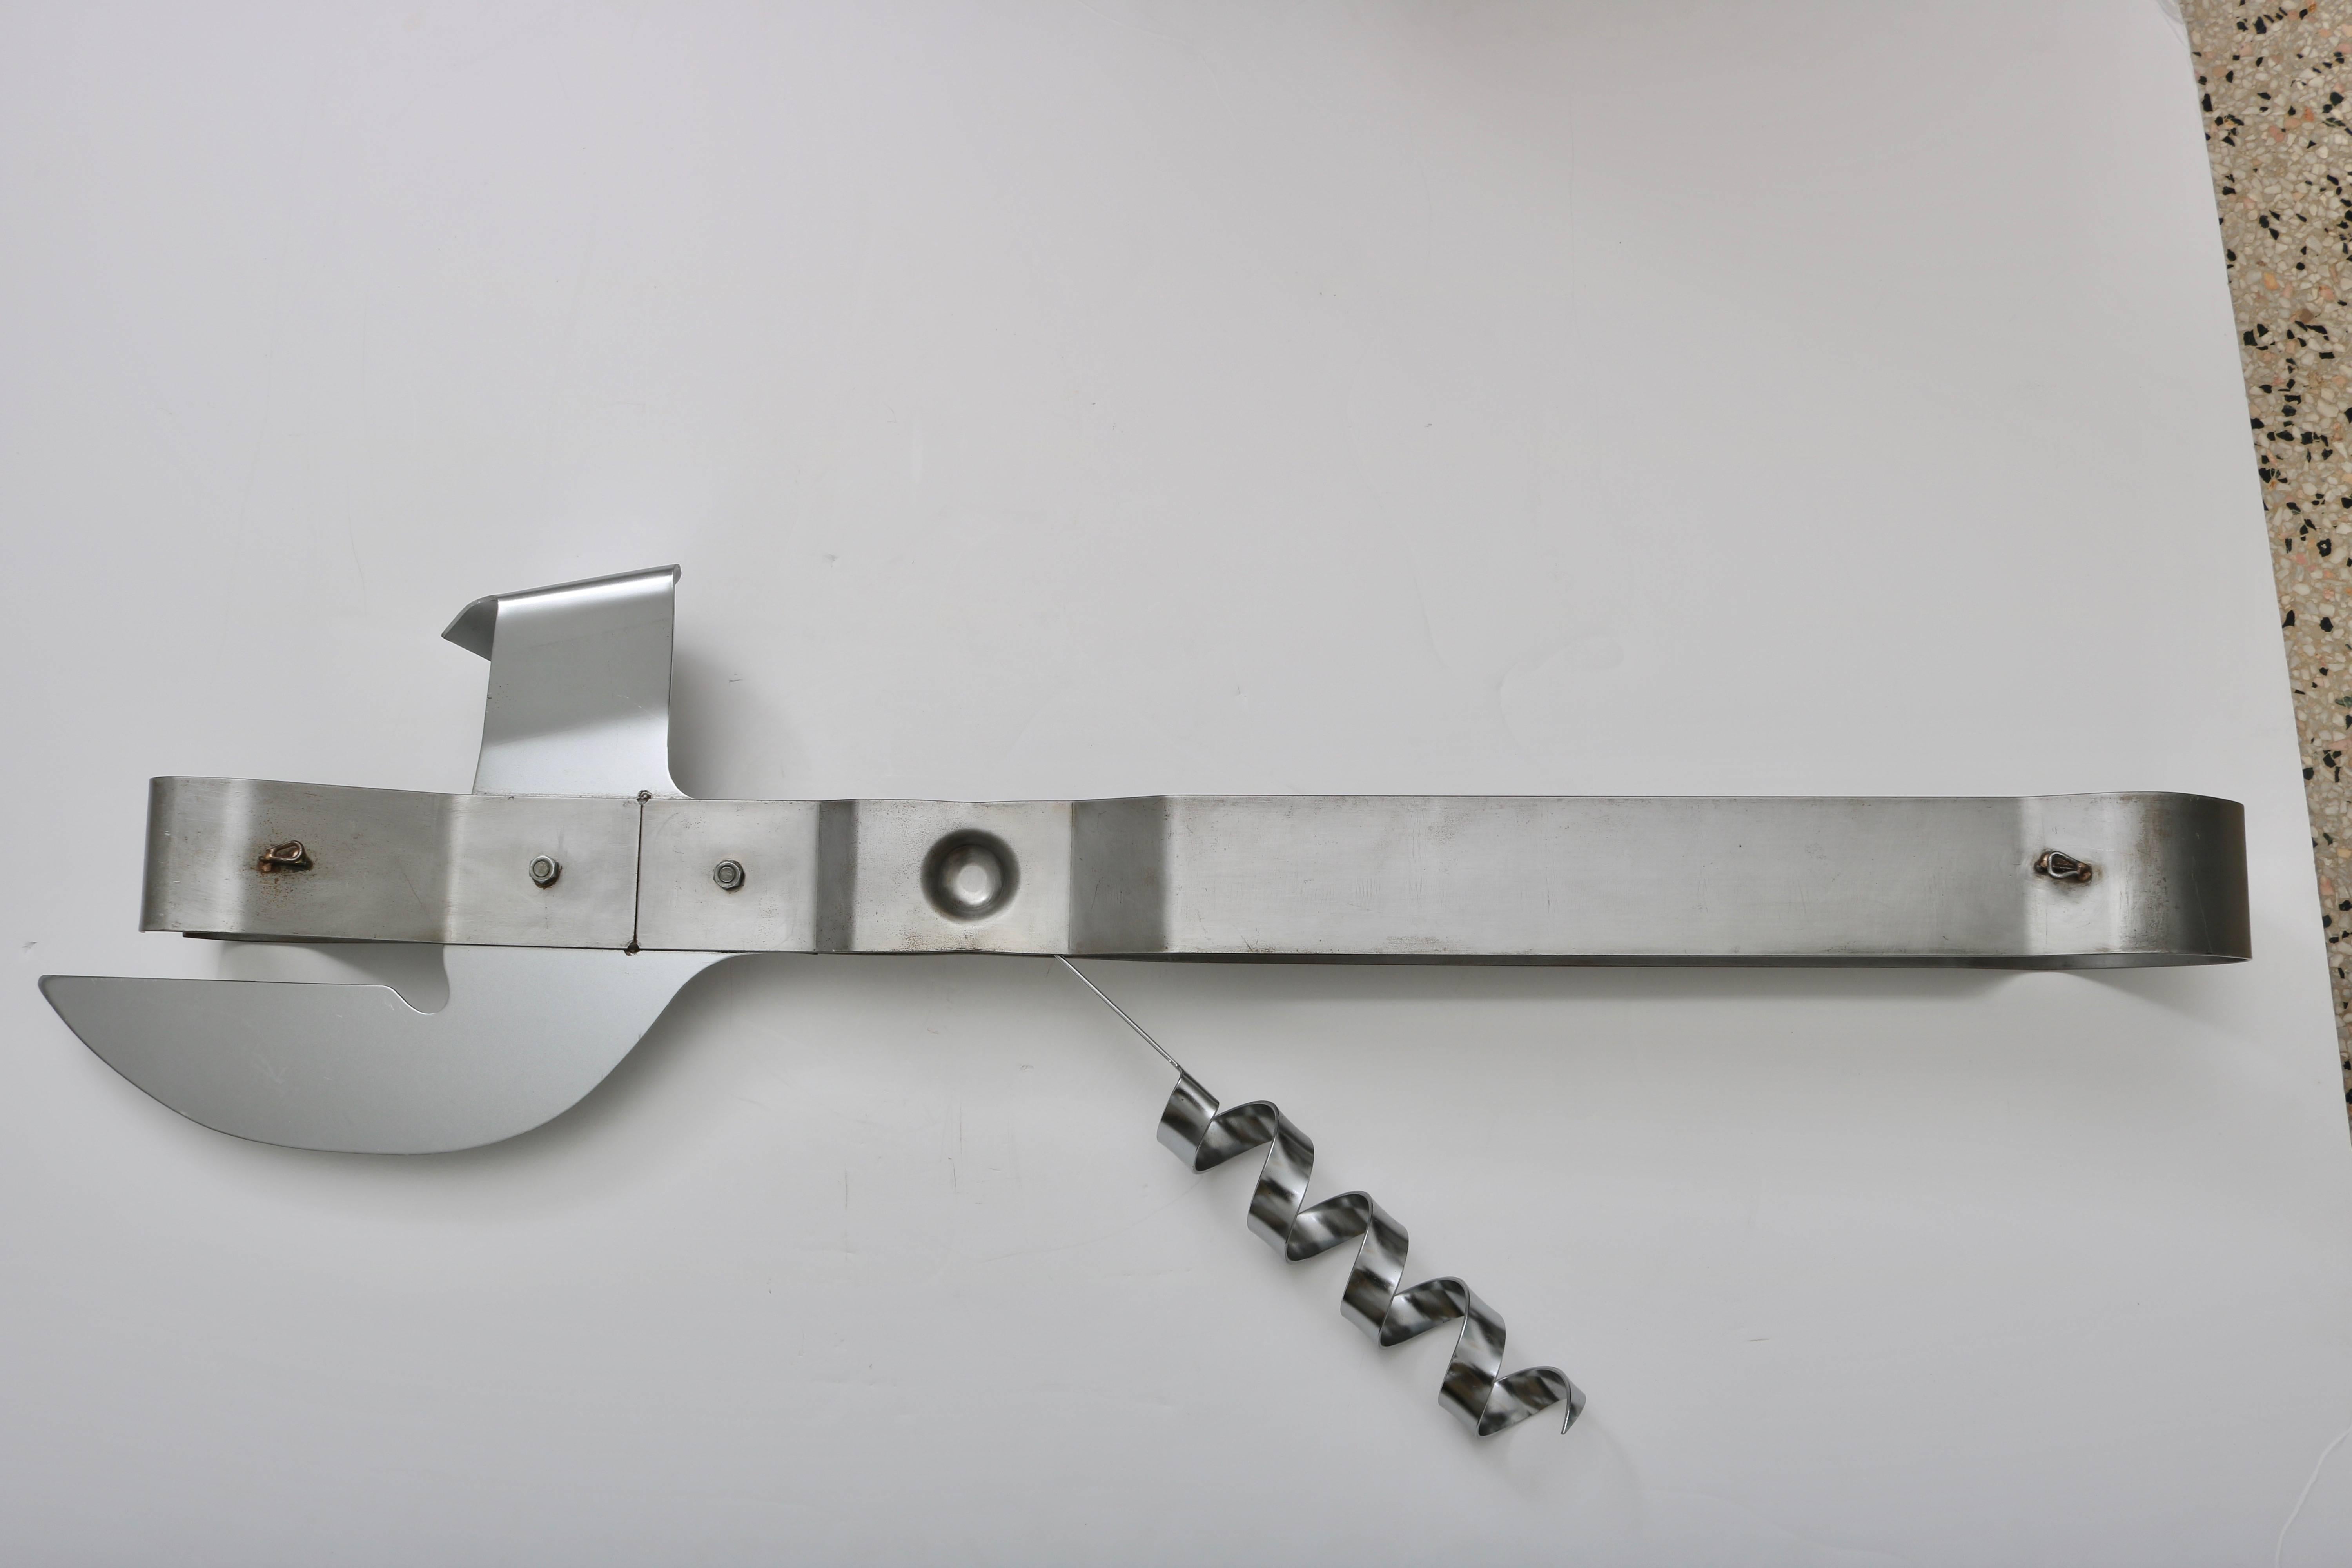  Wall Mount Can Opener Sculpture in Stainless Steel In Good Condition For Sale In West Palm Beach, FL